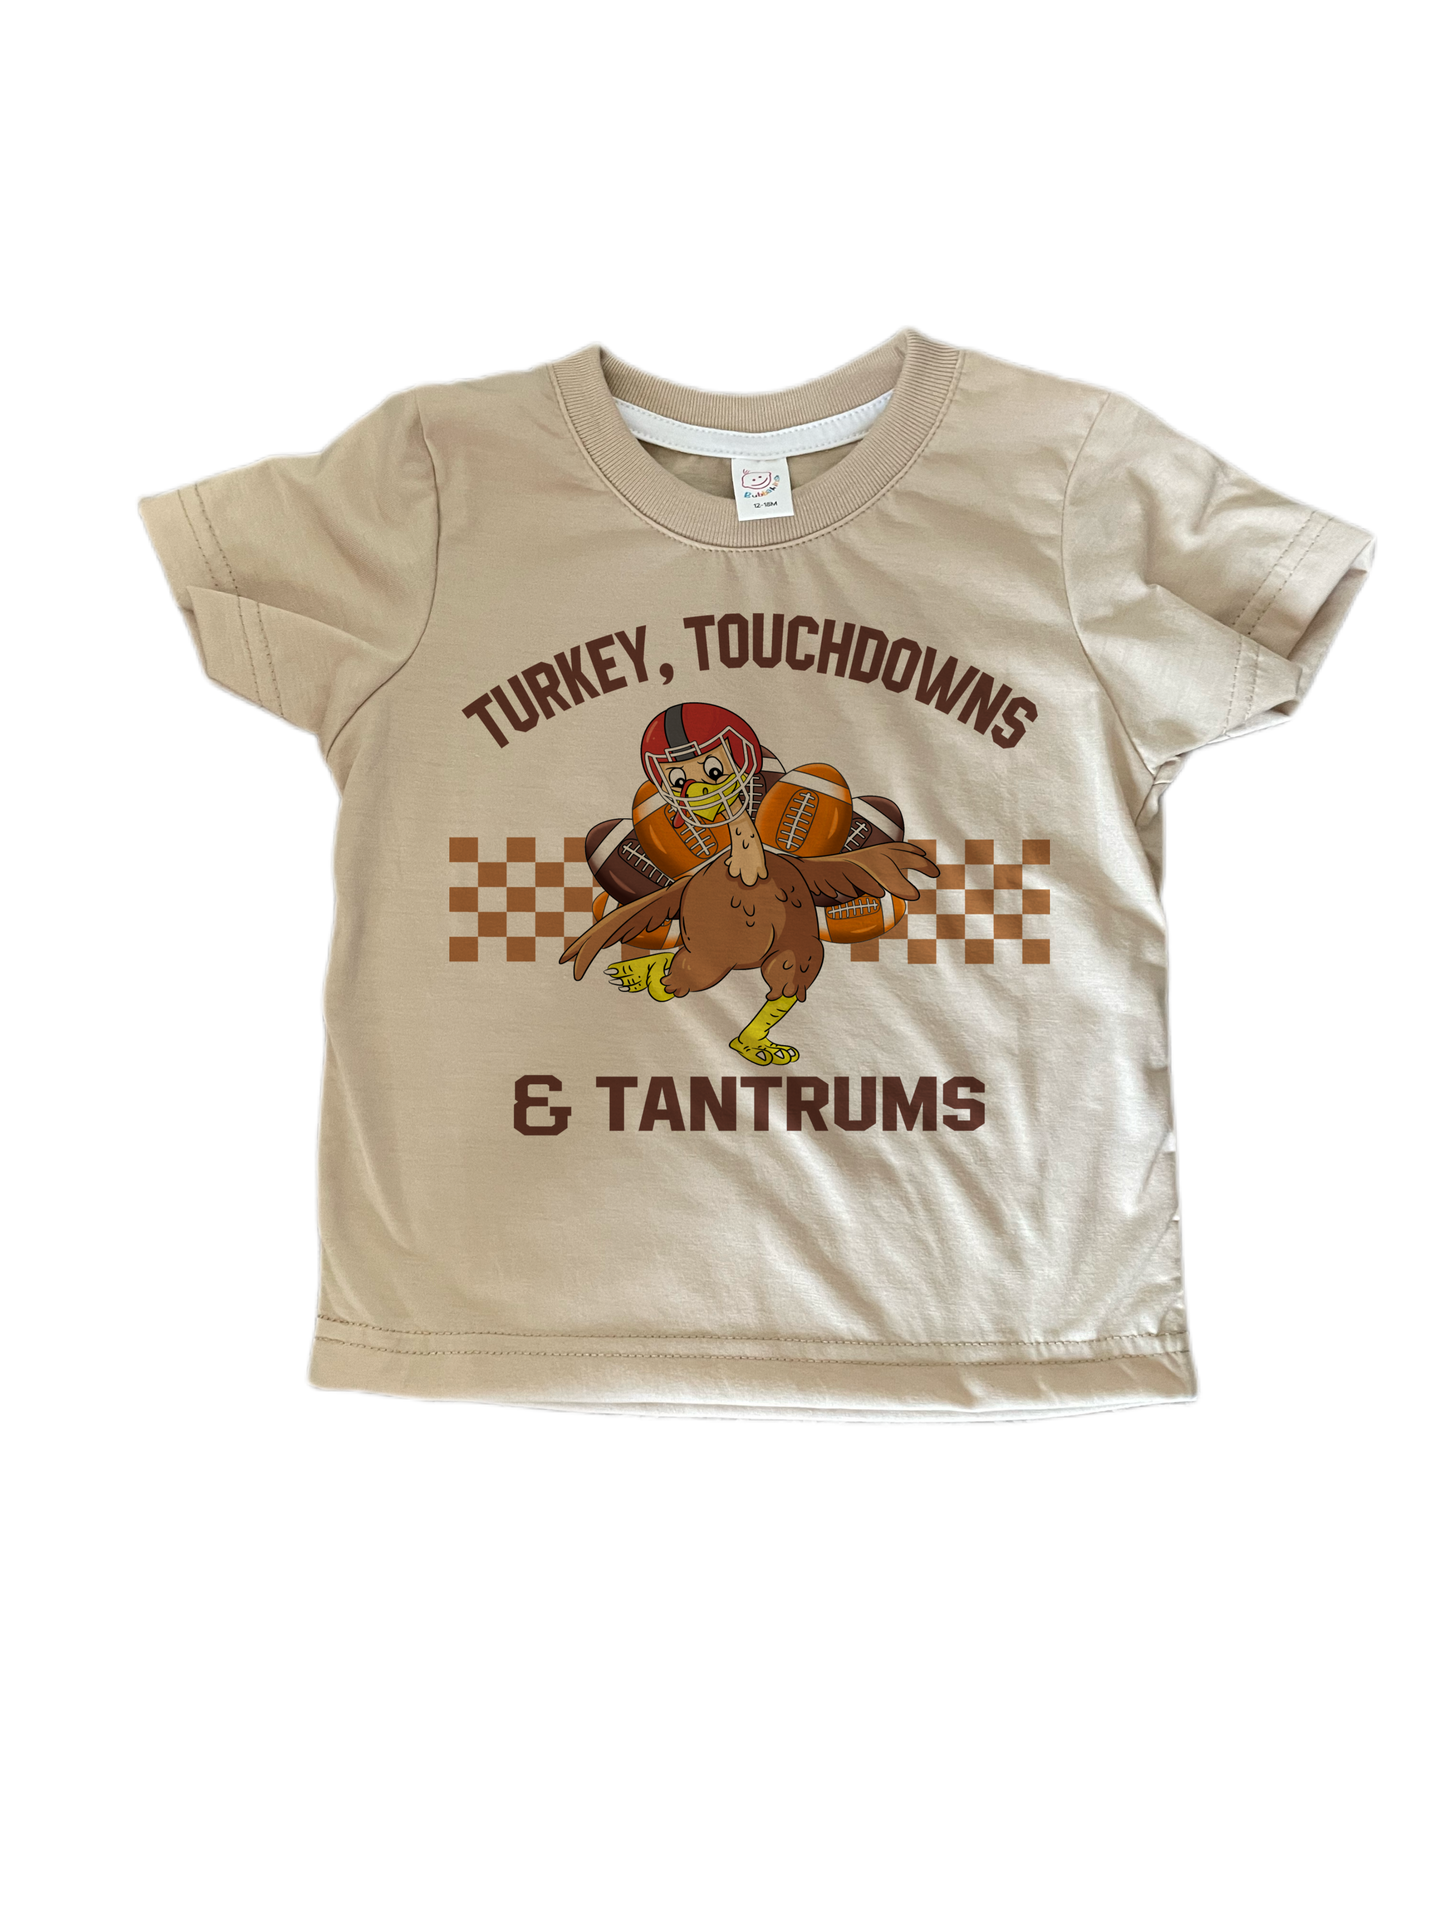 Turkey touchdowns and tantrums (tan)